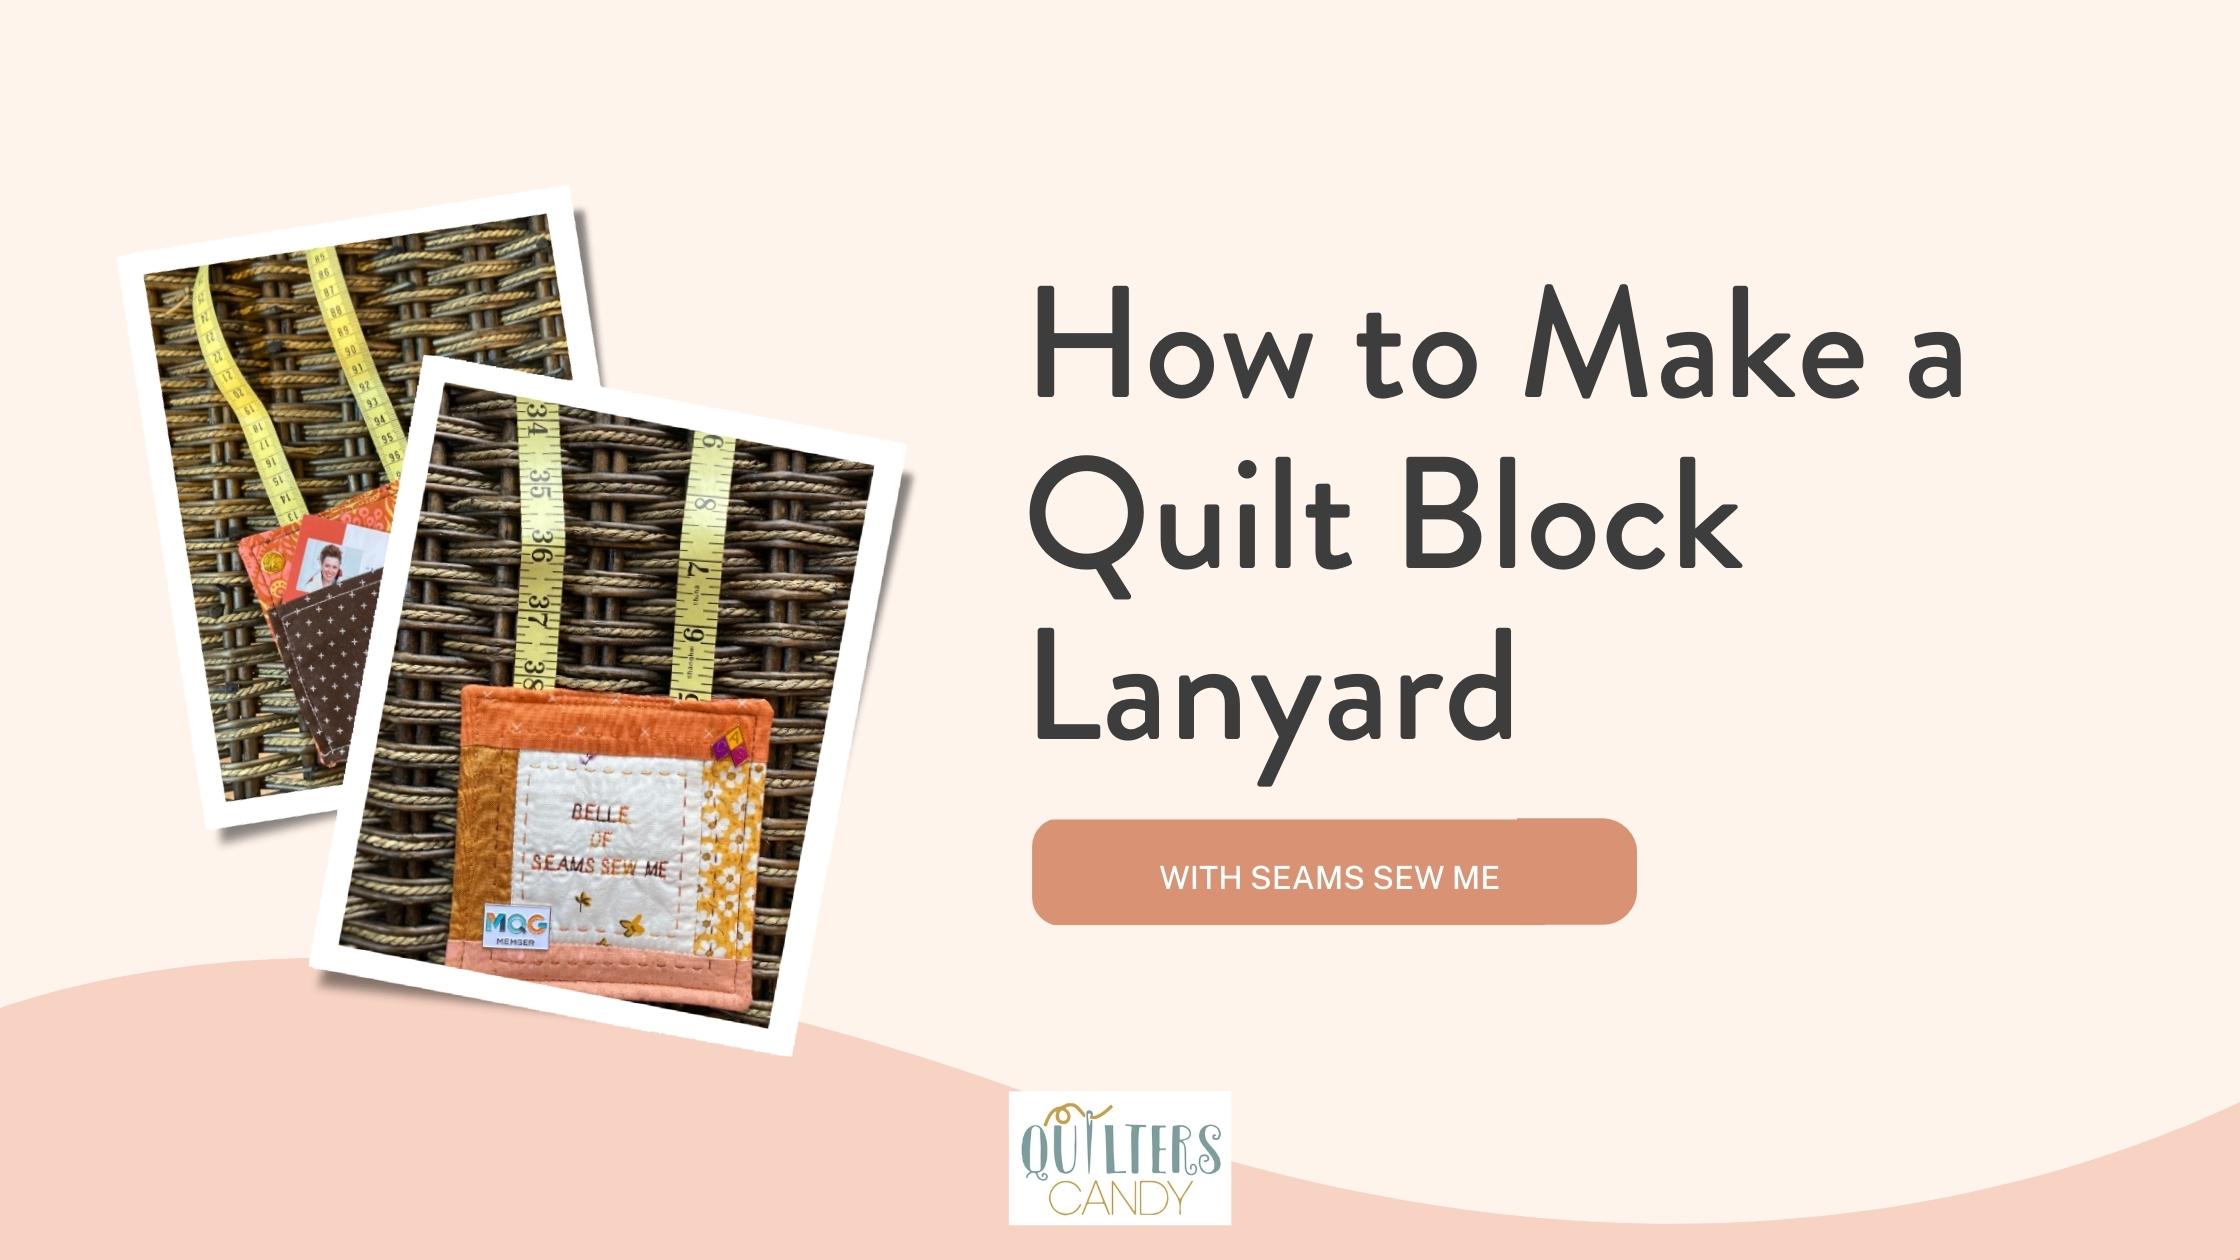 How to Make a Quilt Block Lanyard